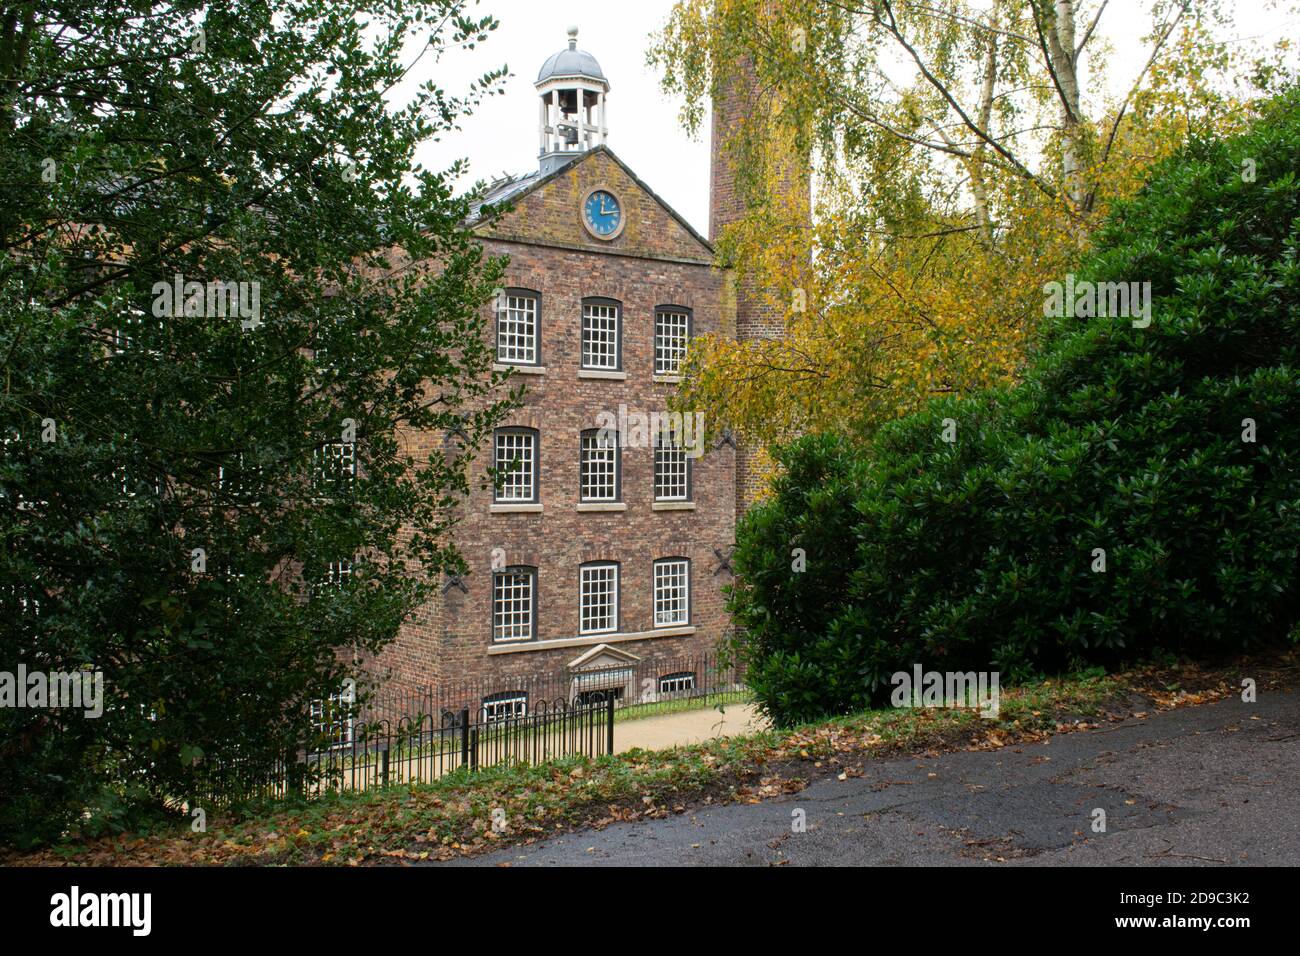 Quarry bank Mill historic cotton mill 1784 , Styal, Cheshire, UK with clock and bell tower. Stock Photo